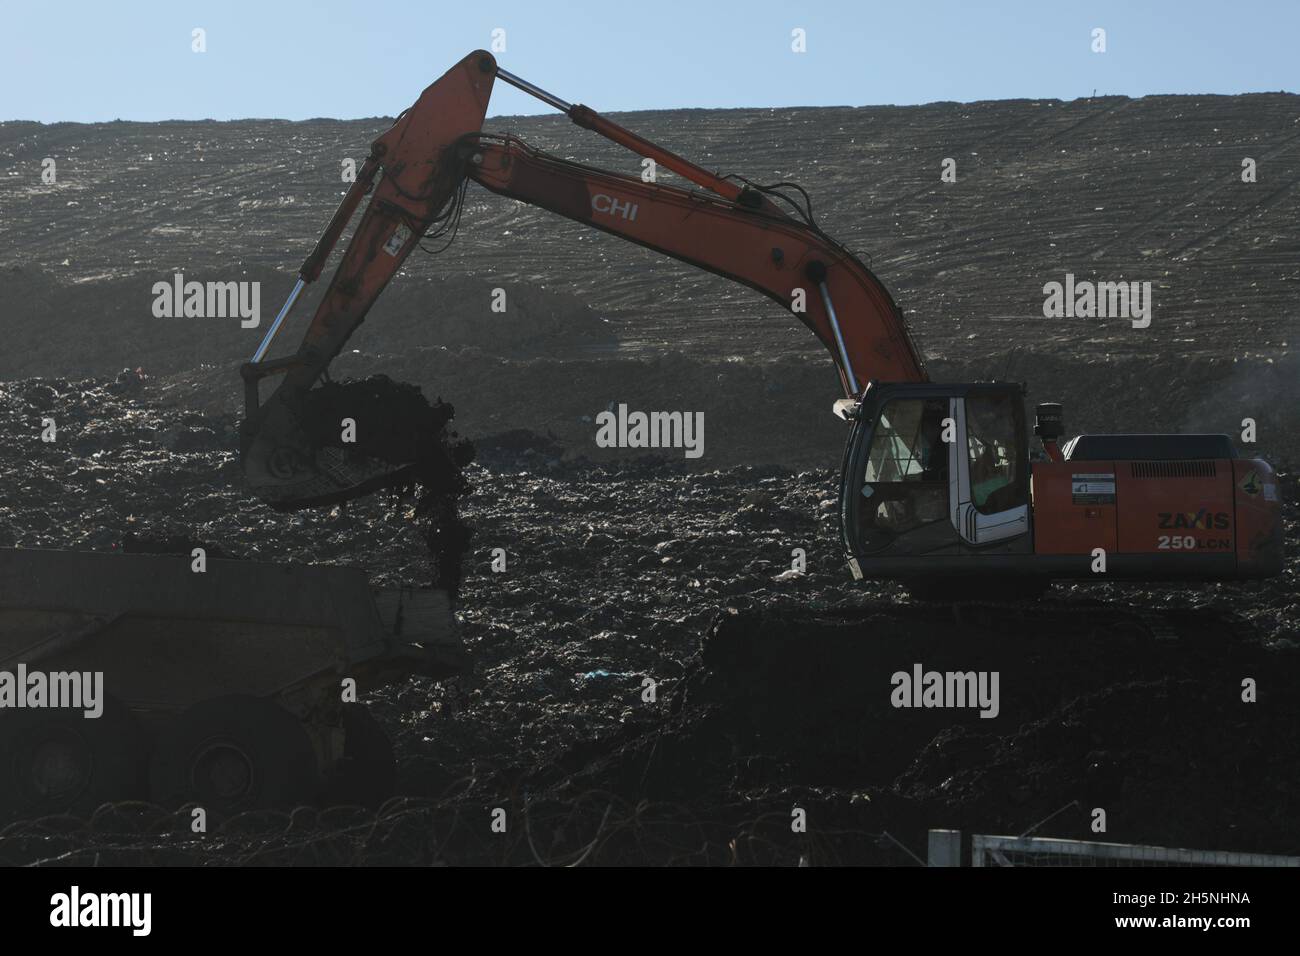 An excavator seen at the Hrybovytchi landfill which is under reclamation (artificial restoration of soil fertility and vegetation after man-made disturbance of nature). The only legal place for garbage collection from Lviv and surrounding villages. It has been operating since 1958 close to the village of Velyki Hrybovychi. The landfill area is over 38 hectares. On May 28, 2016, a large fire broke out on the territory of the Hrybovytsia landfill causing a collapse of solid waste where three rescuers died under the rubble. Stock Photo